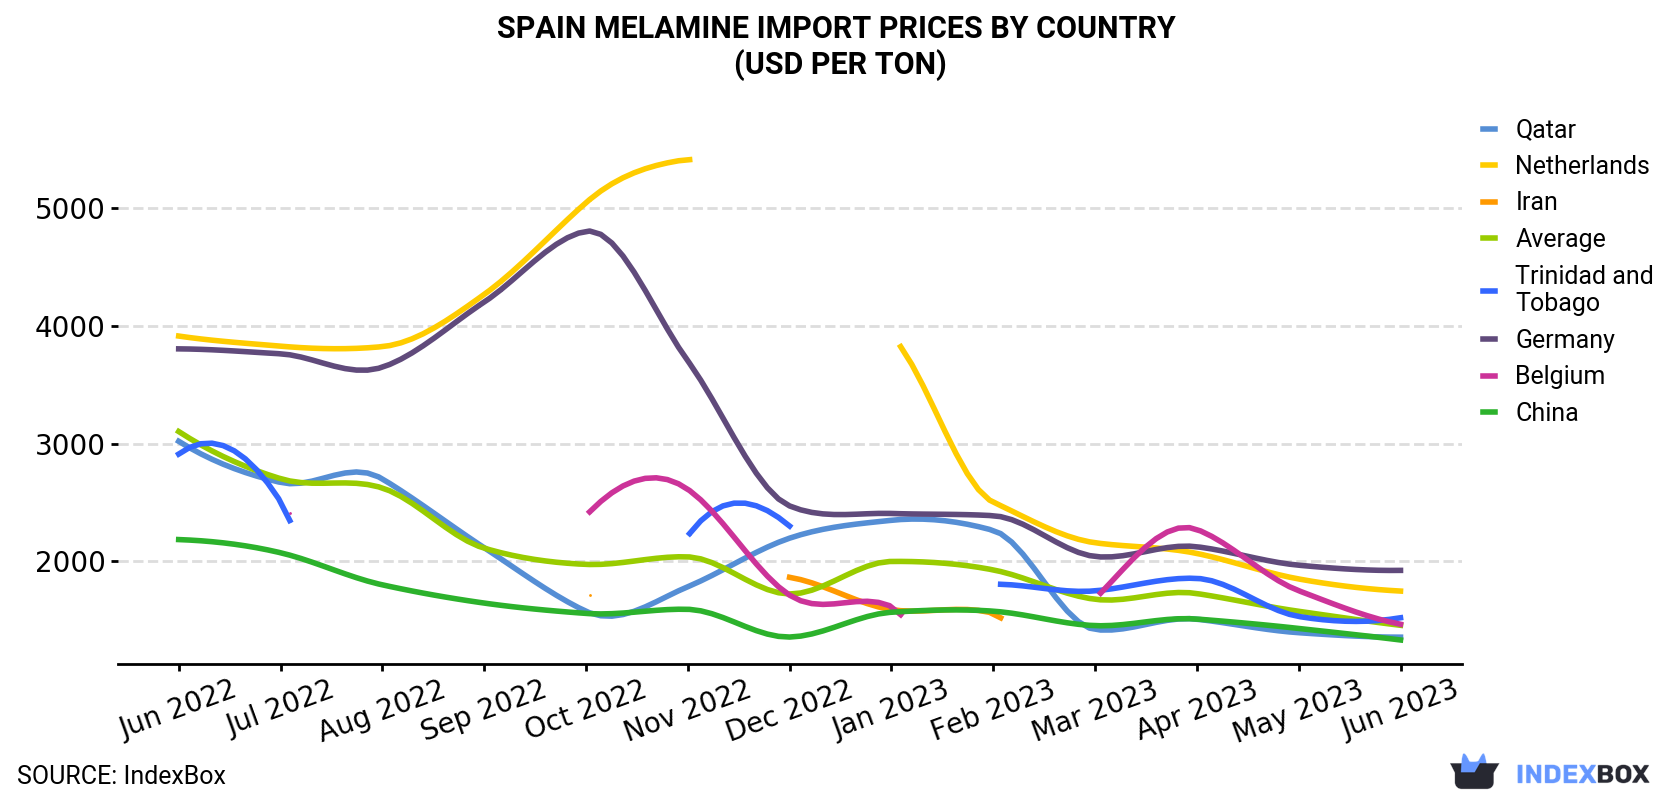 Spain Melamine Import Prices By Country (USD Per Ton)